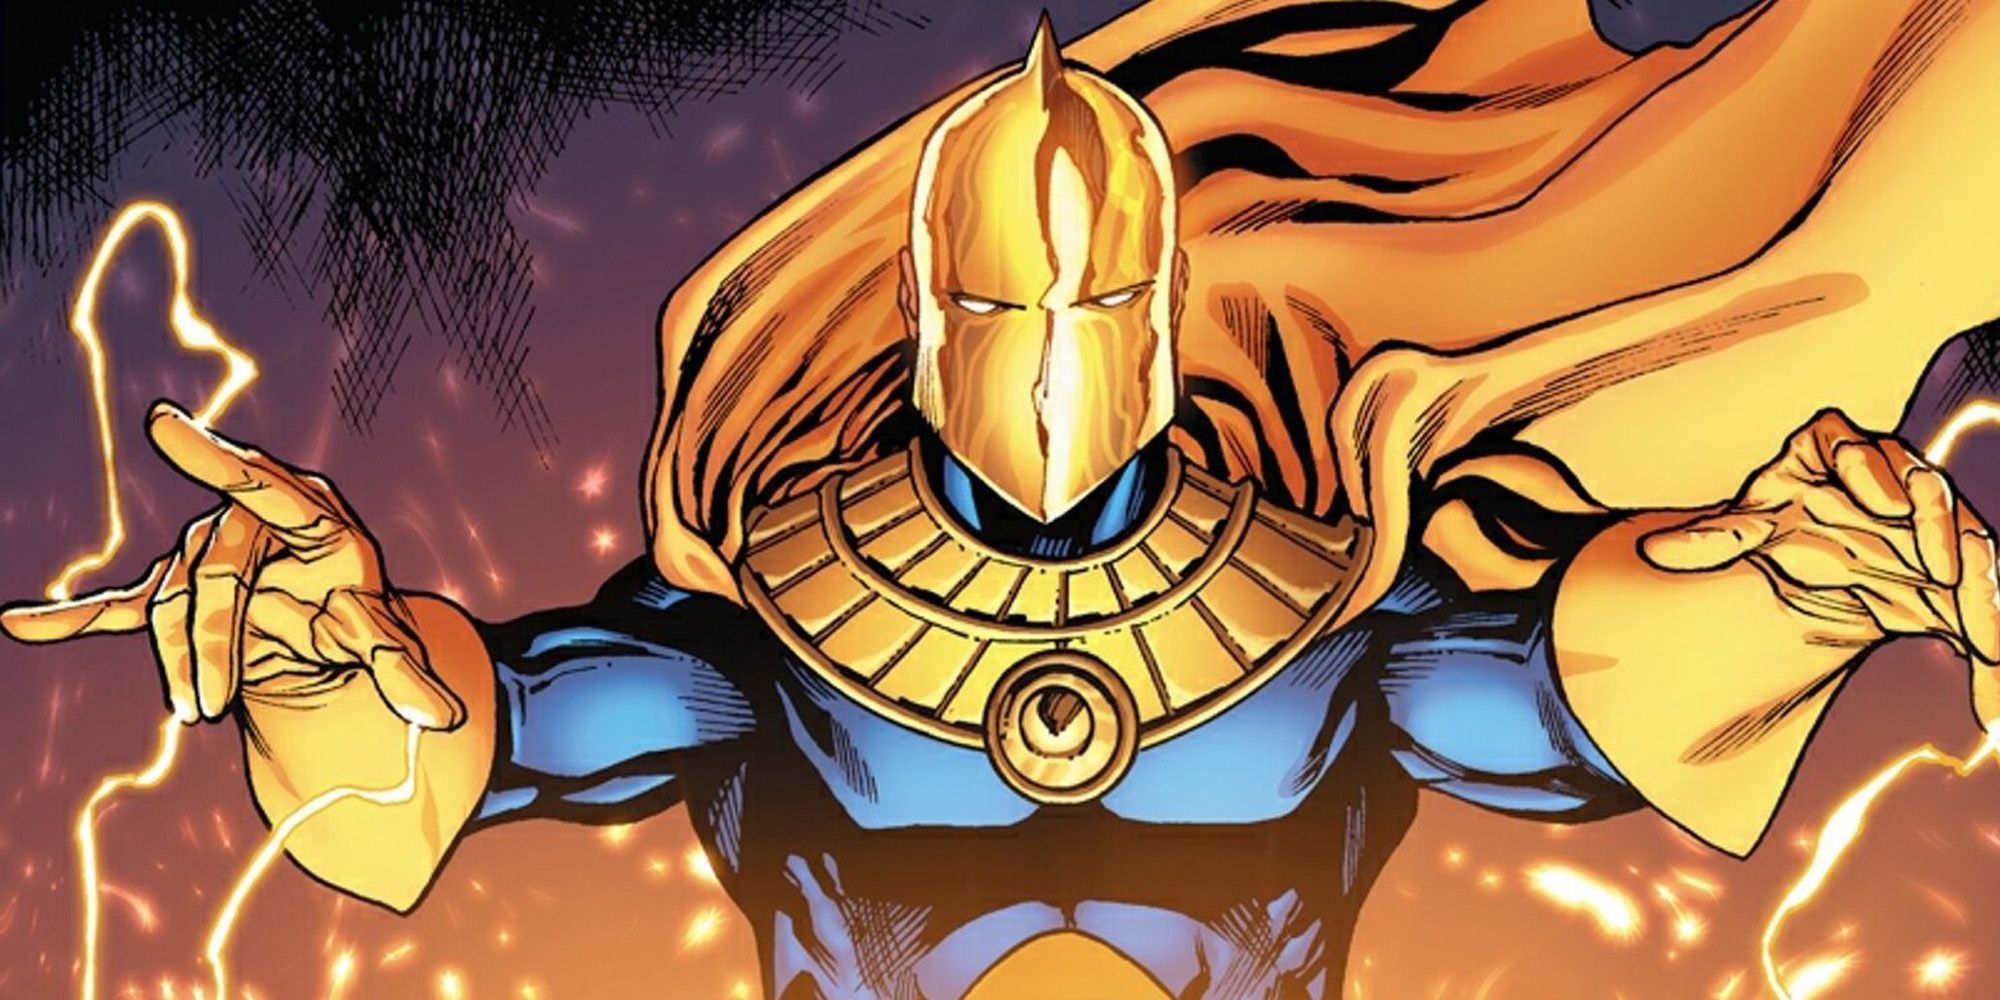 Doctor Fate about to cast a spell